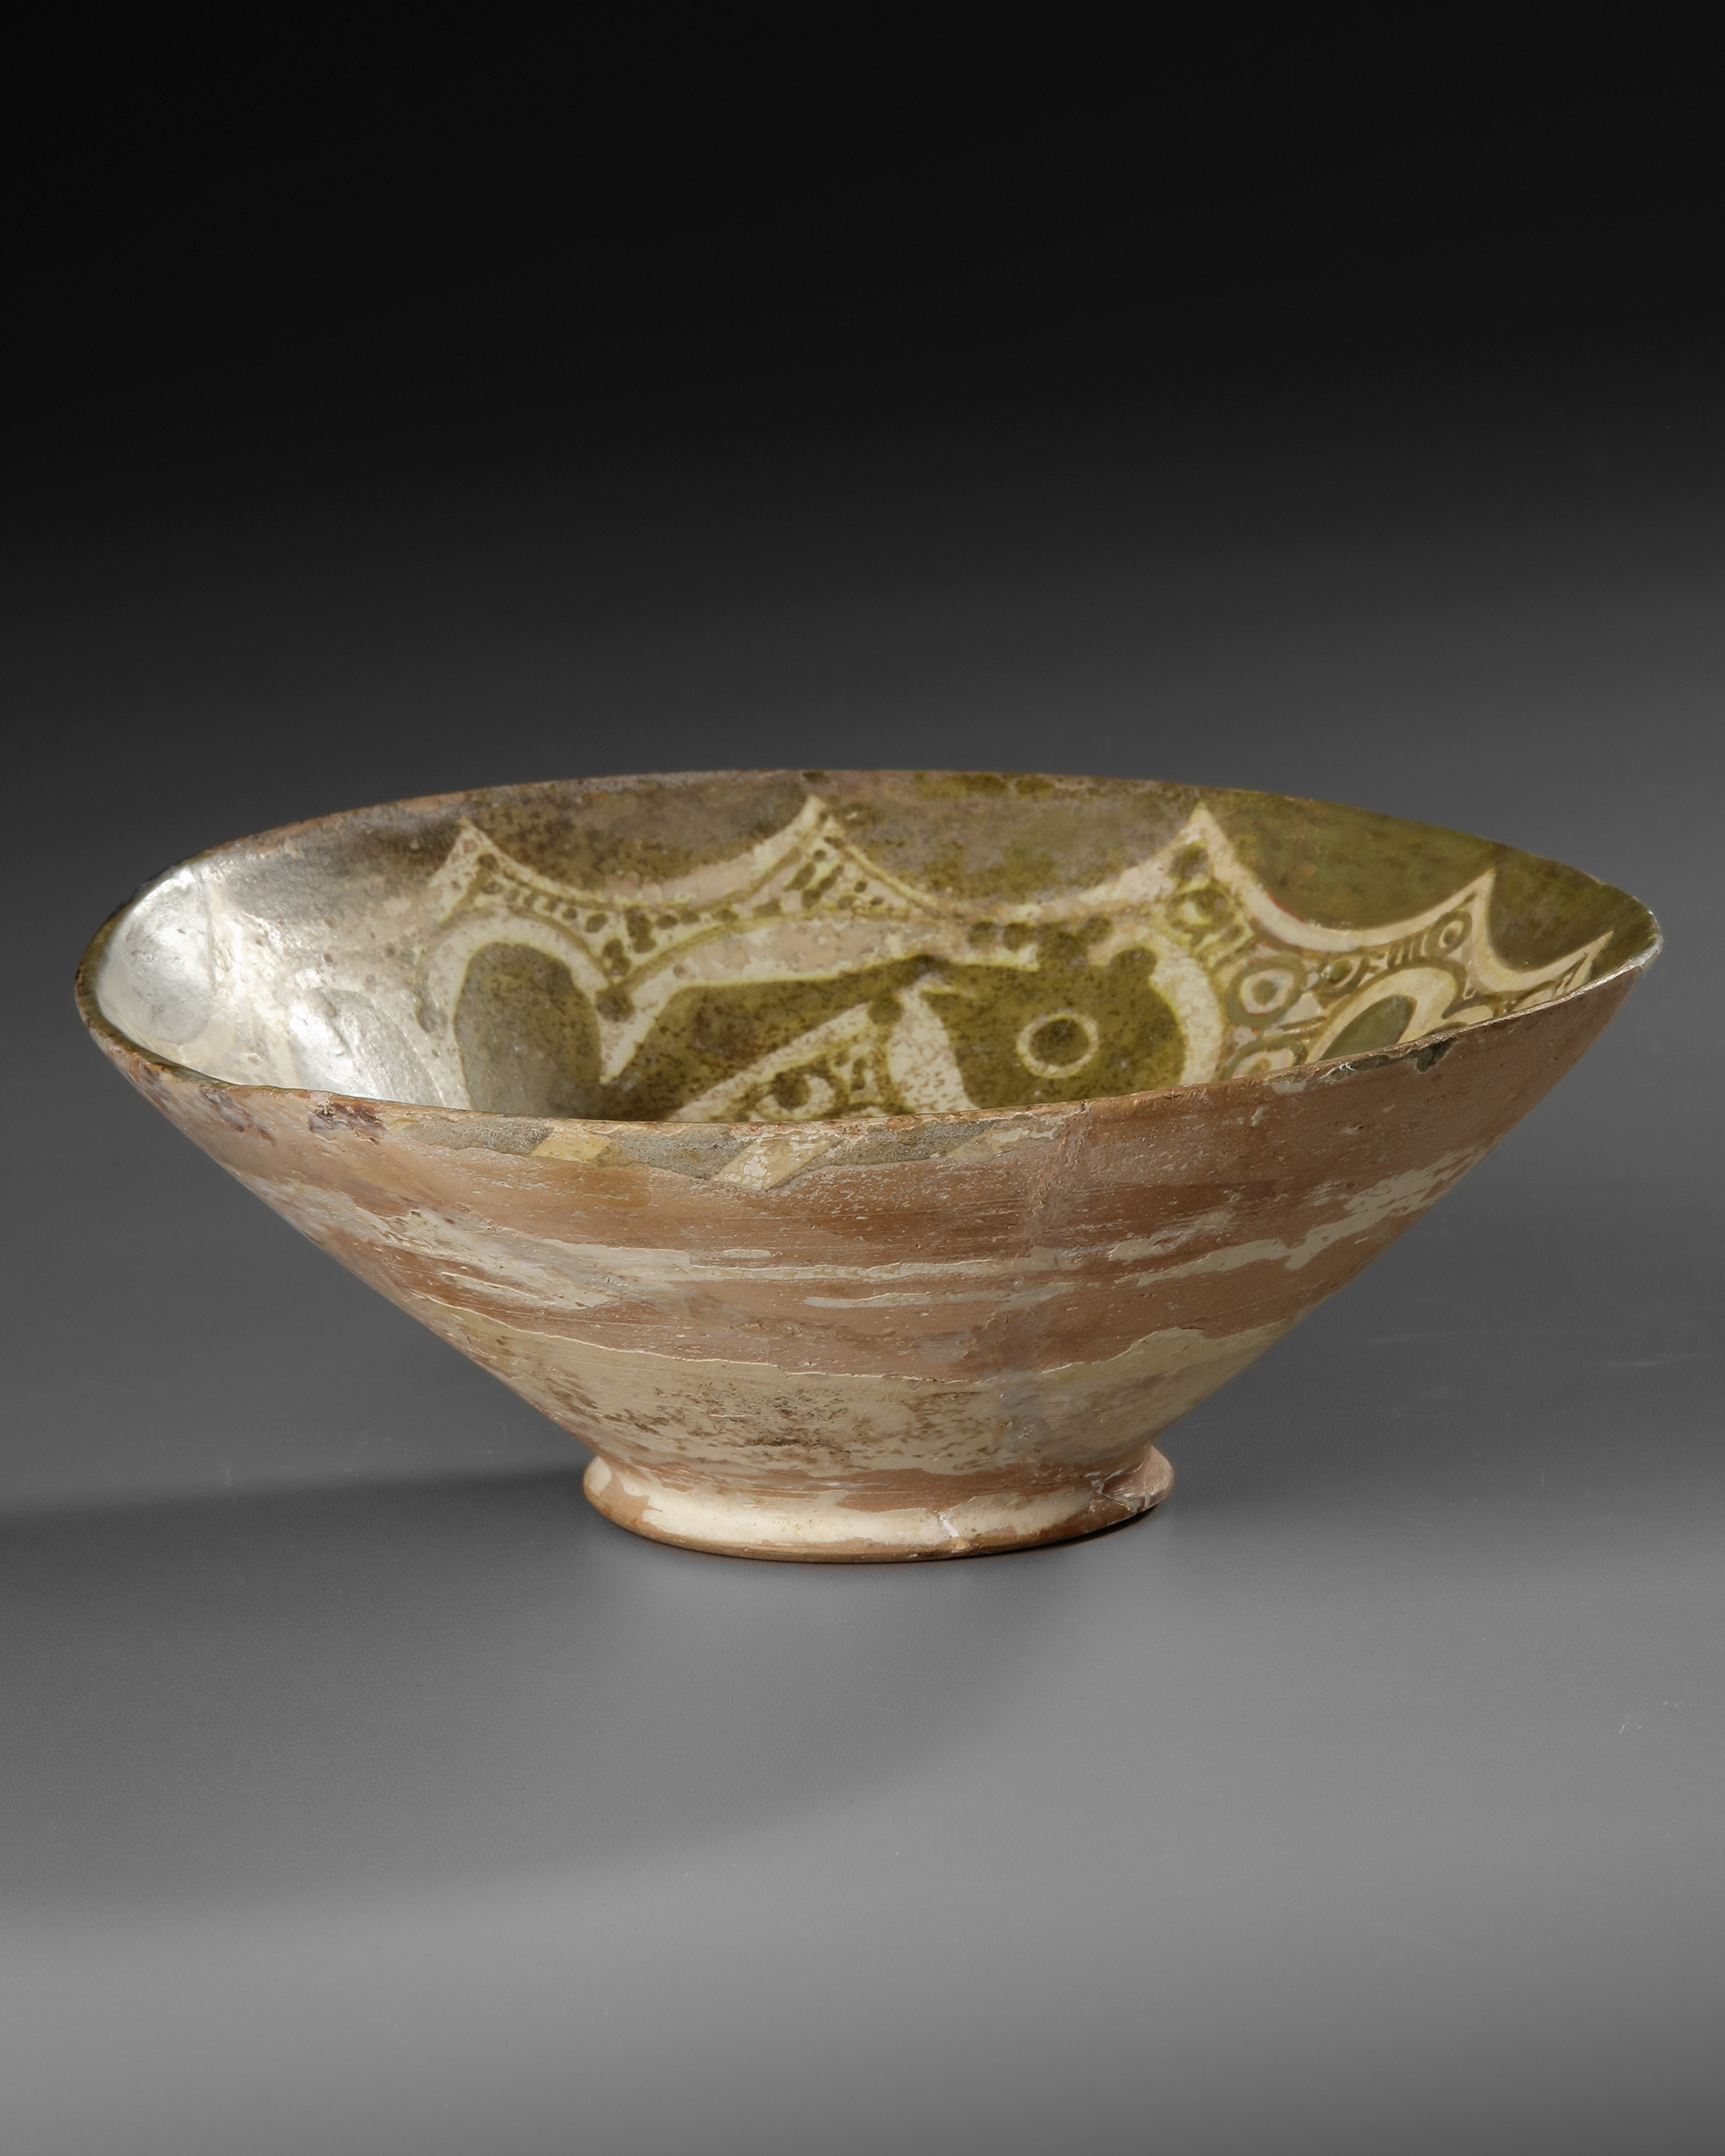 A NISHAPUR POTTERY BOWL, PERSIA, 10TH CENTURY - Image 4 of 10